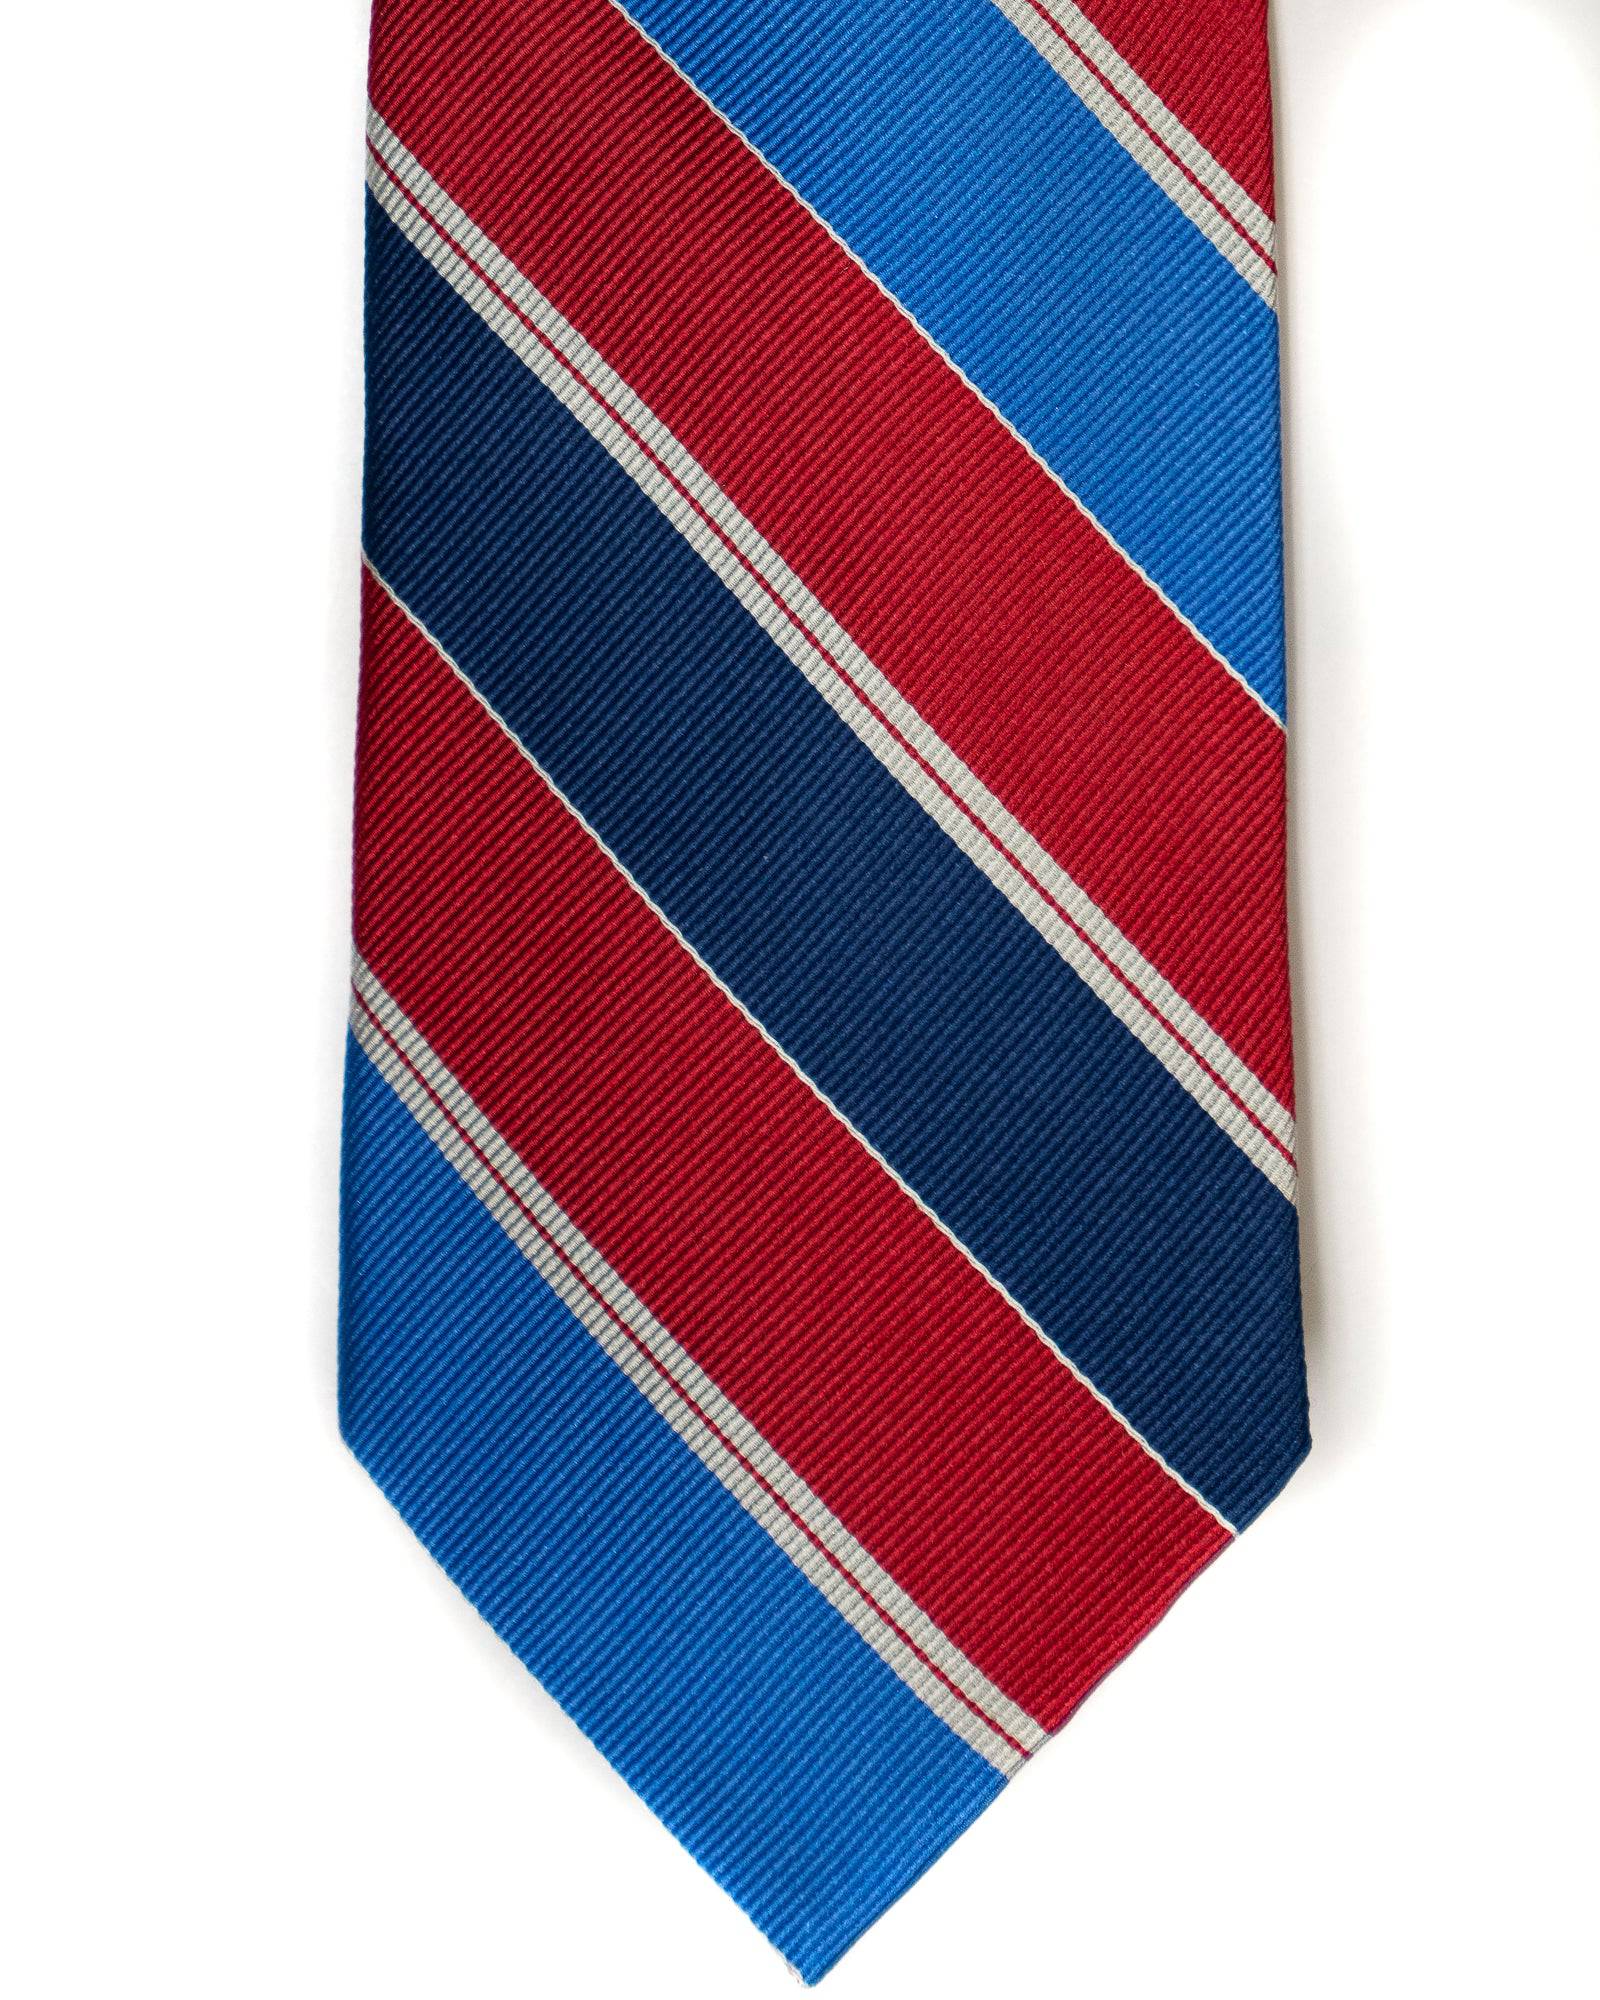 Silk Tie In Red With Blue & Navy Stripes - Rainwater's Men's Clothing and Tuxedo Rental